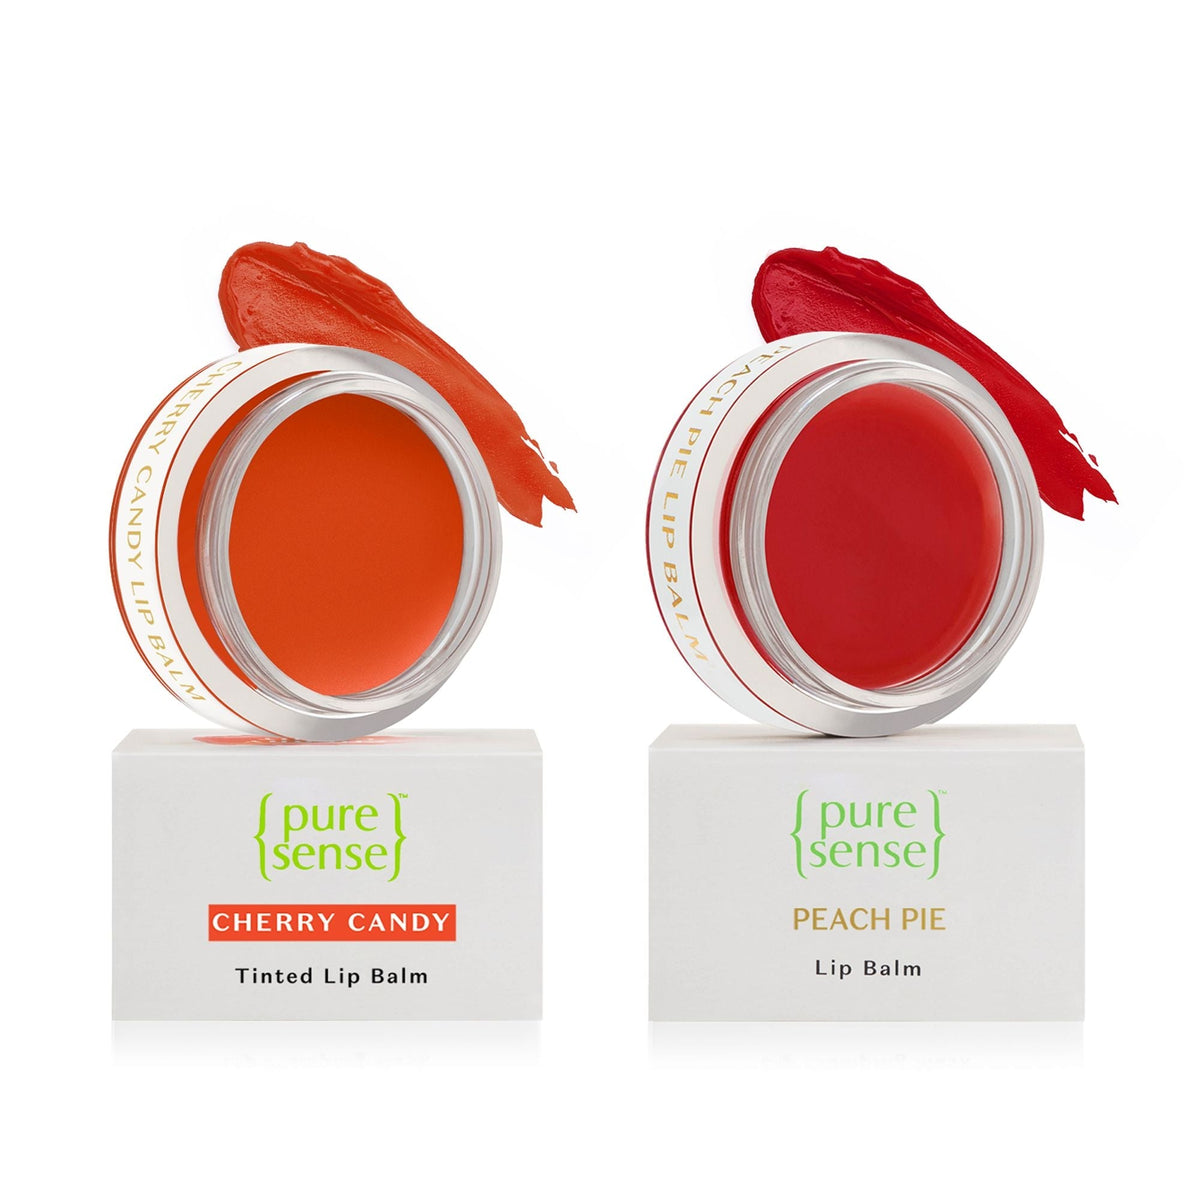 Cherry Candy Tinted Lip Balm 5ml +  Peach Pie Lip Balm 5ml | Pack of 2 | From the makers of Parachute Advansed | 10ml